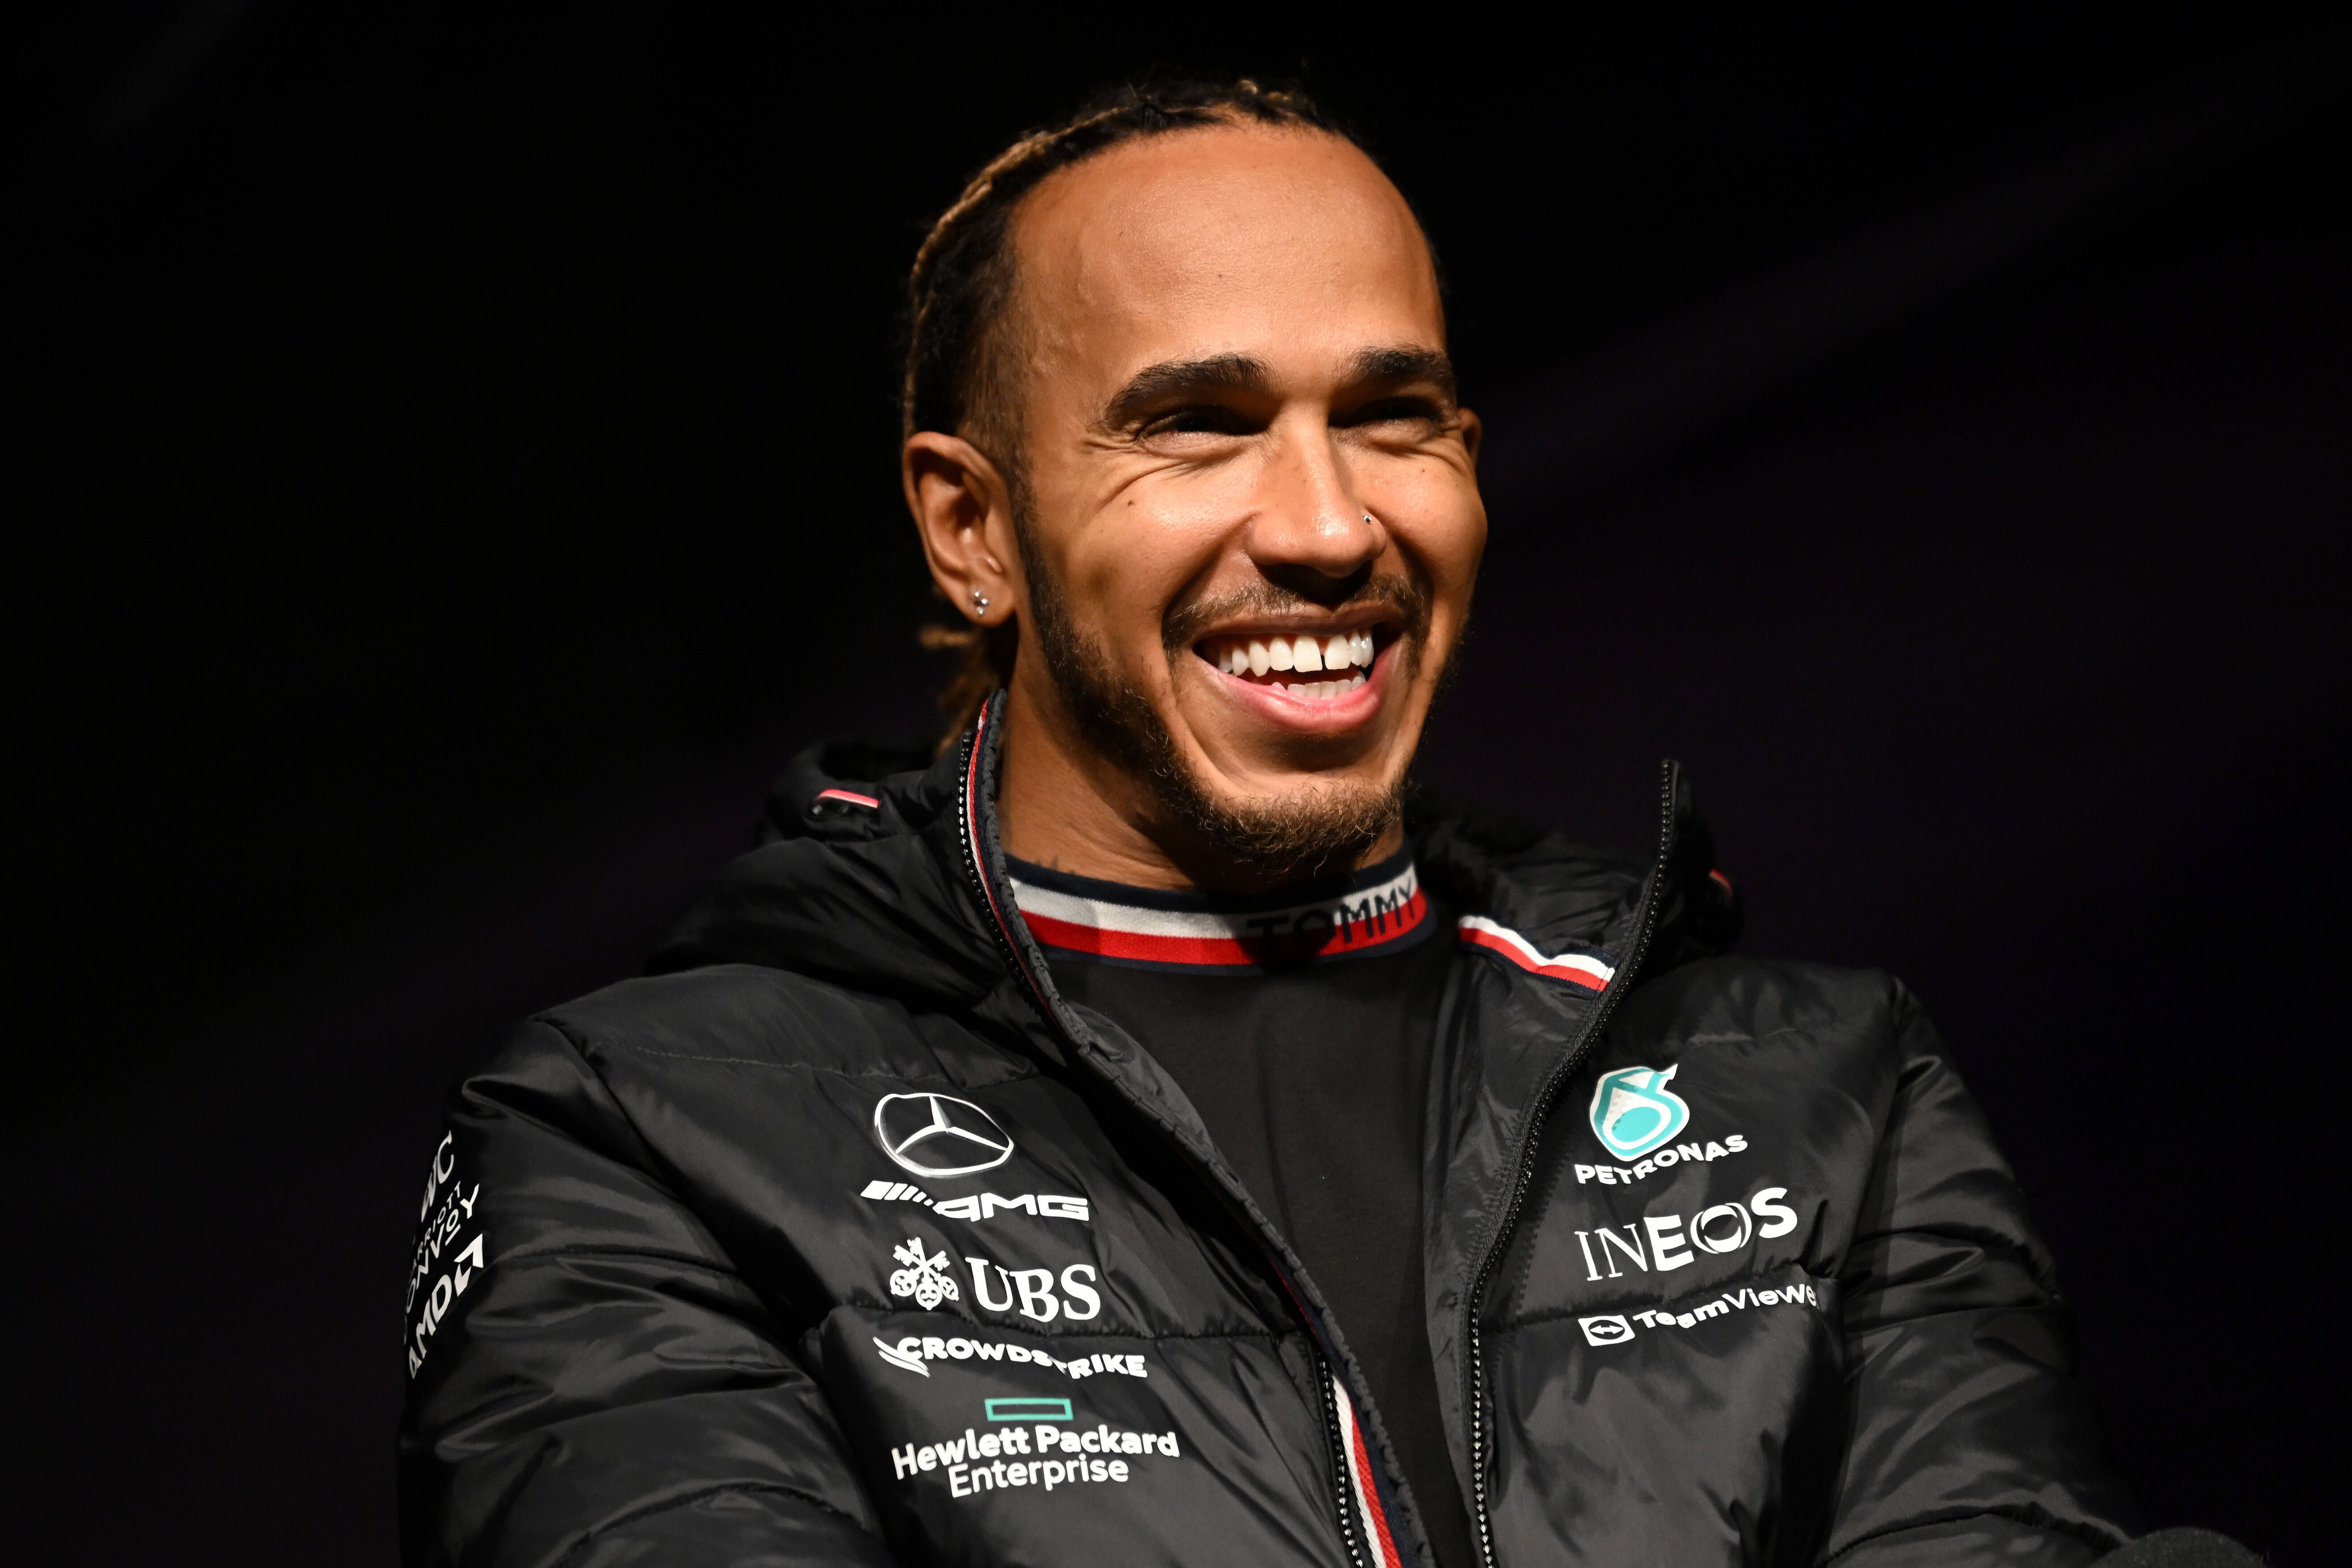 Lewis Hamilton reacts to racist comments by Nelson Piquet